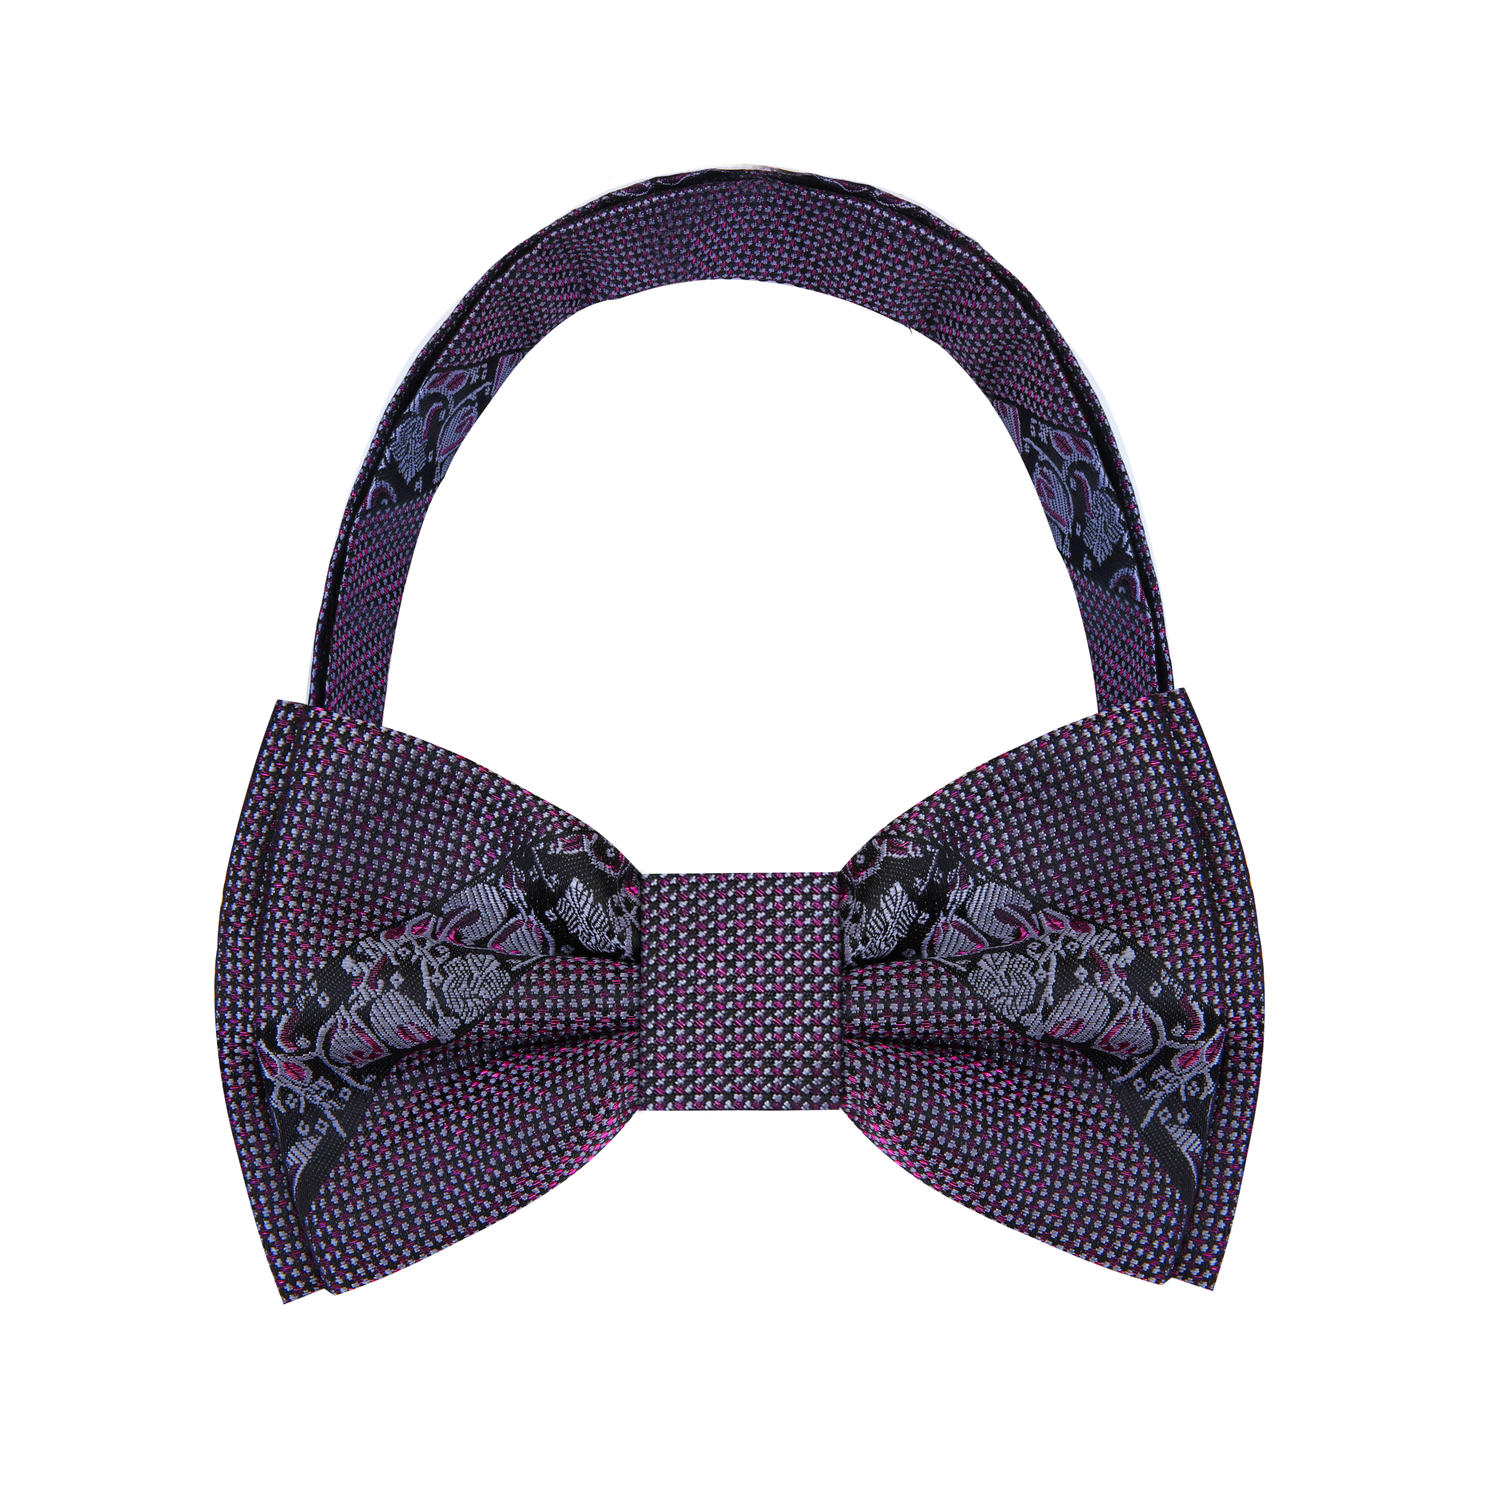 A Metallic Purple, Black Color With Intricate Floral Pattern Silk Kids Pre-Tied Bow Tie